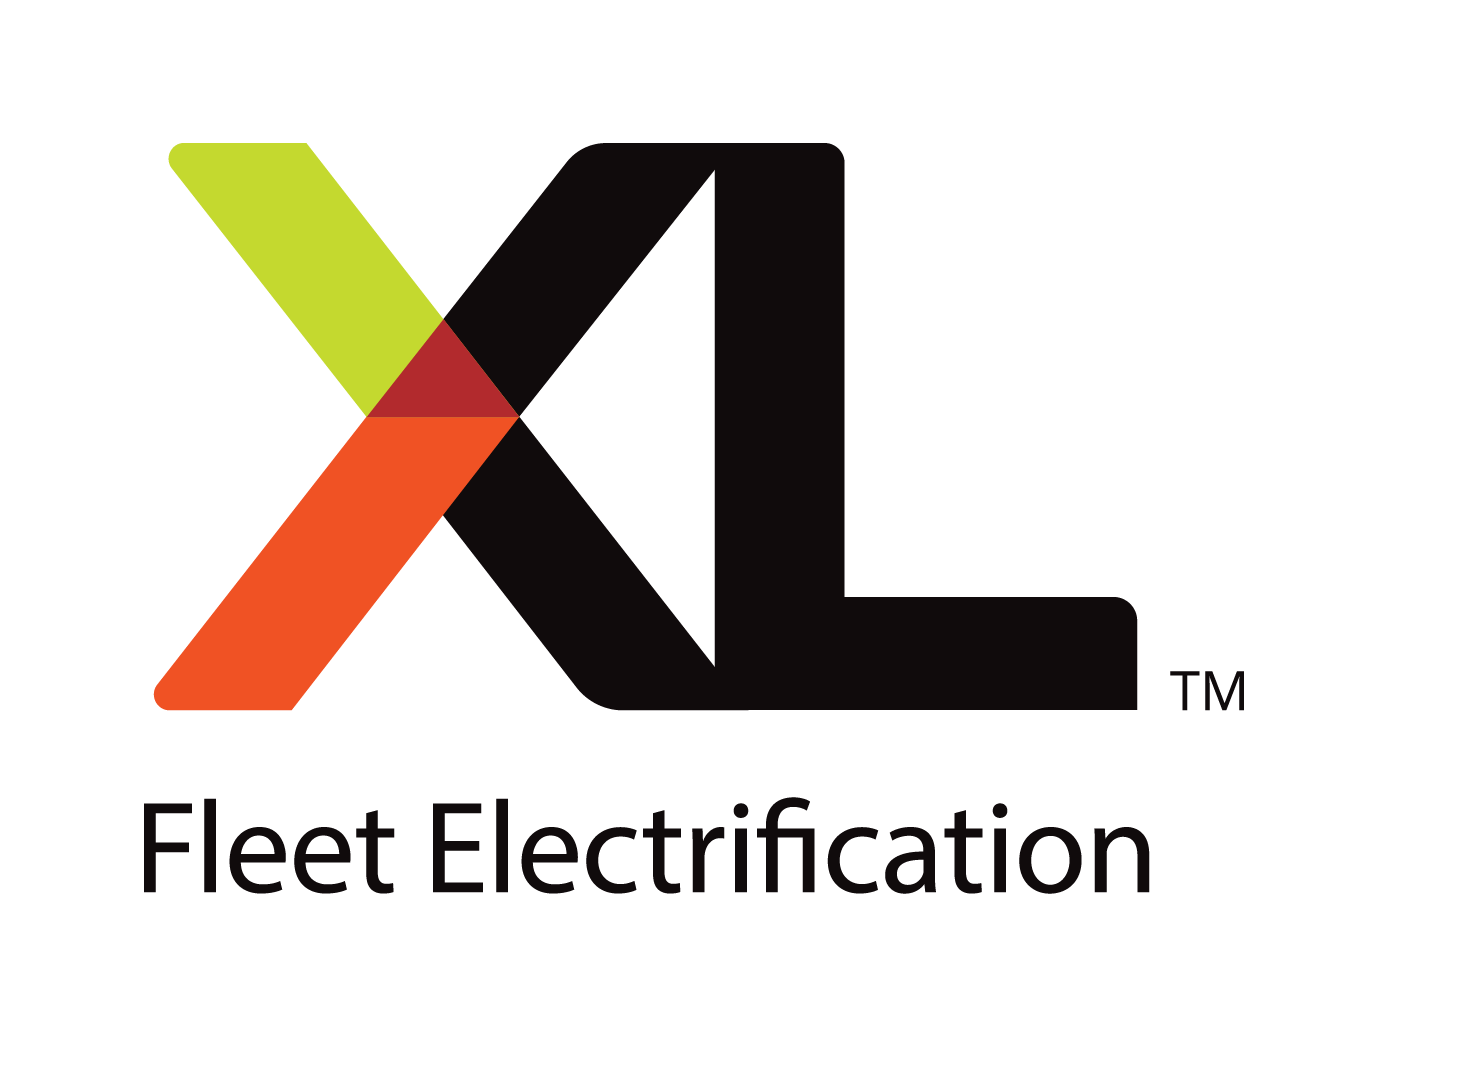 XL's hybrid electric drive system enables UVA's work trucks to be 25% more fuel efficient and produce 20% fewer CO2 emissions